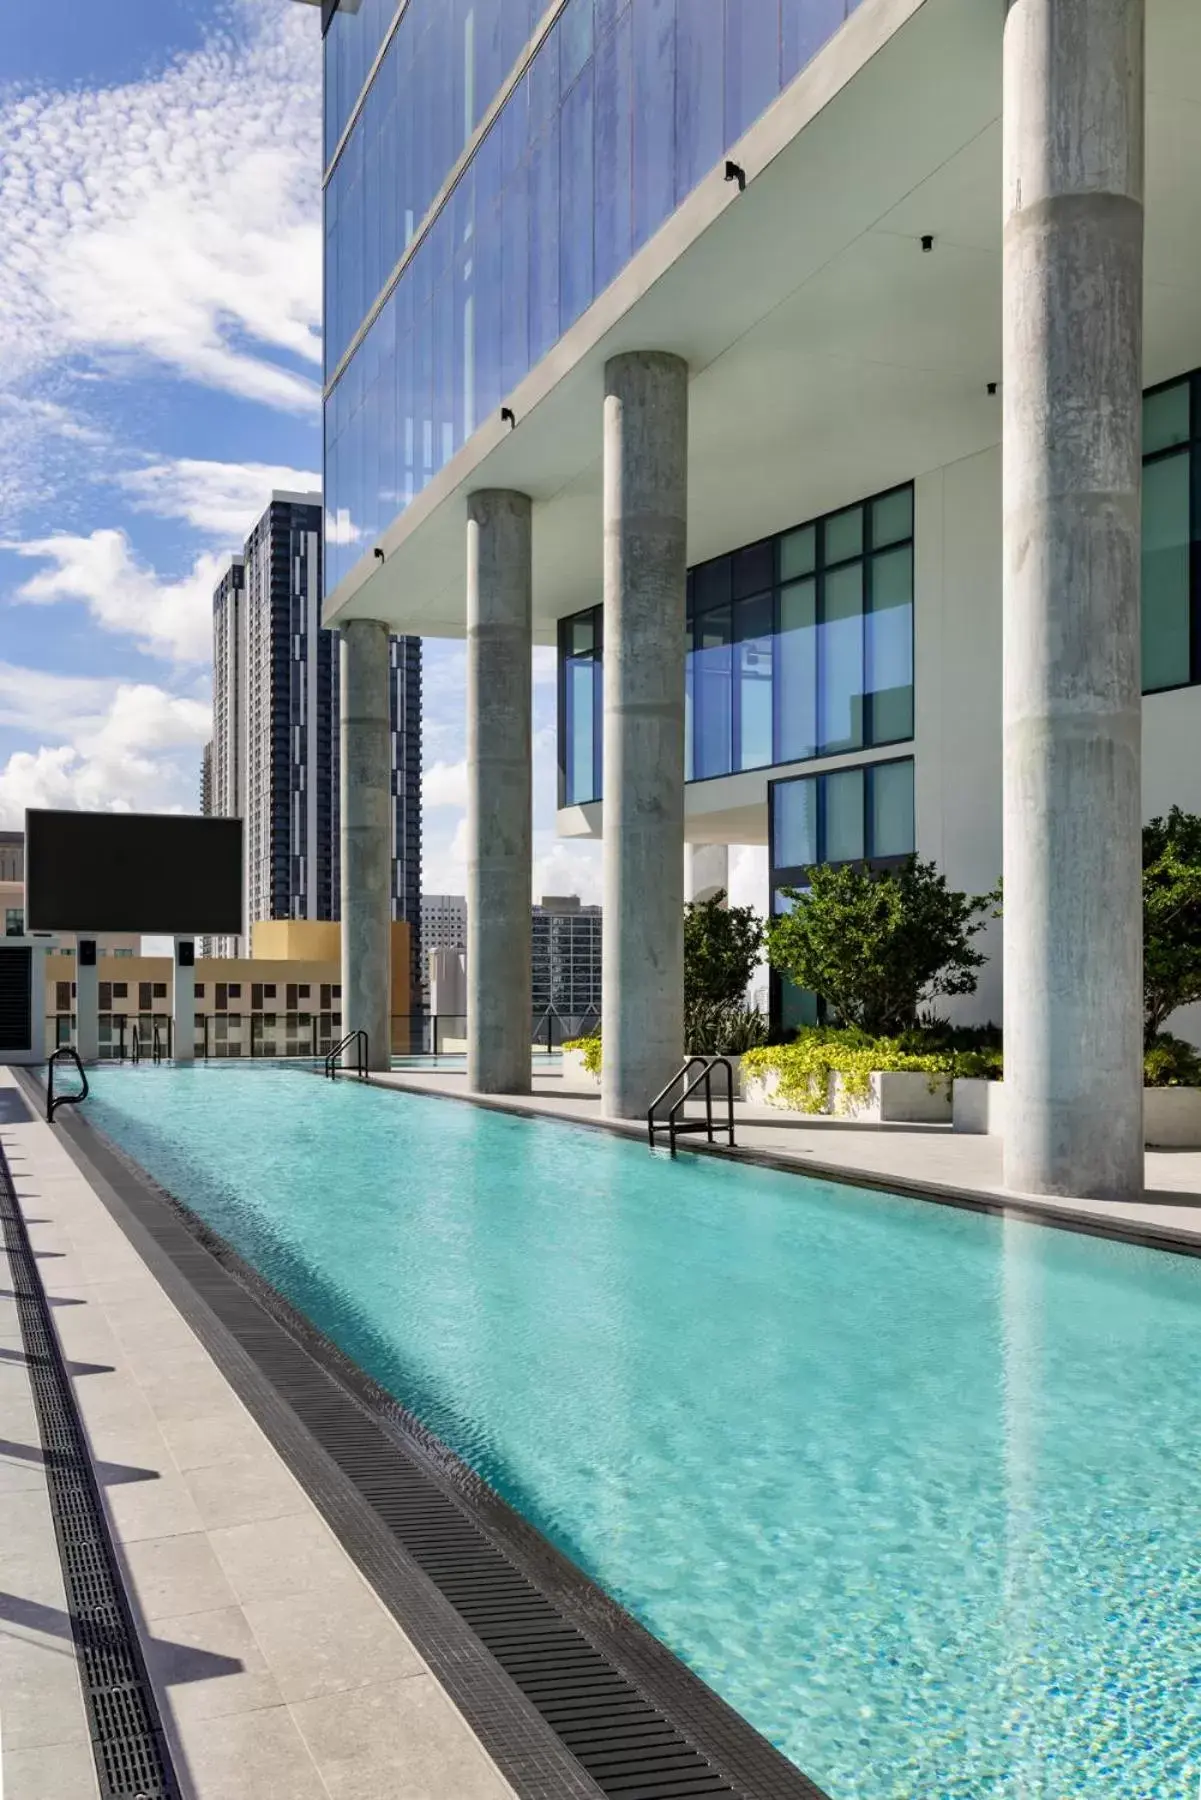 Property building, Swimming Pool in The Elser Hotel Miami